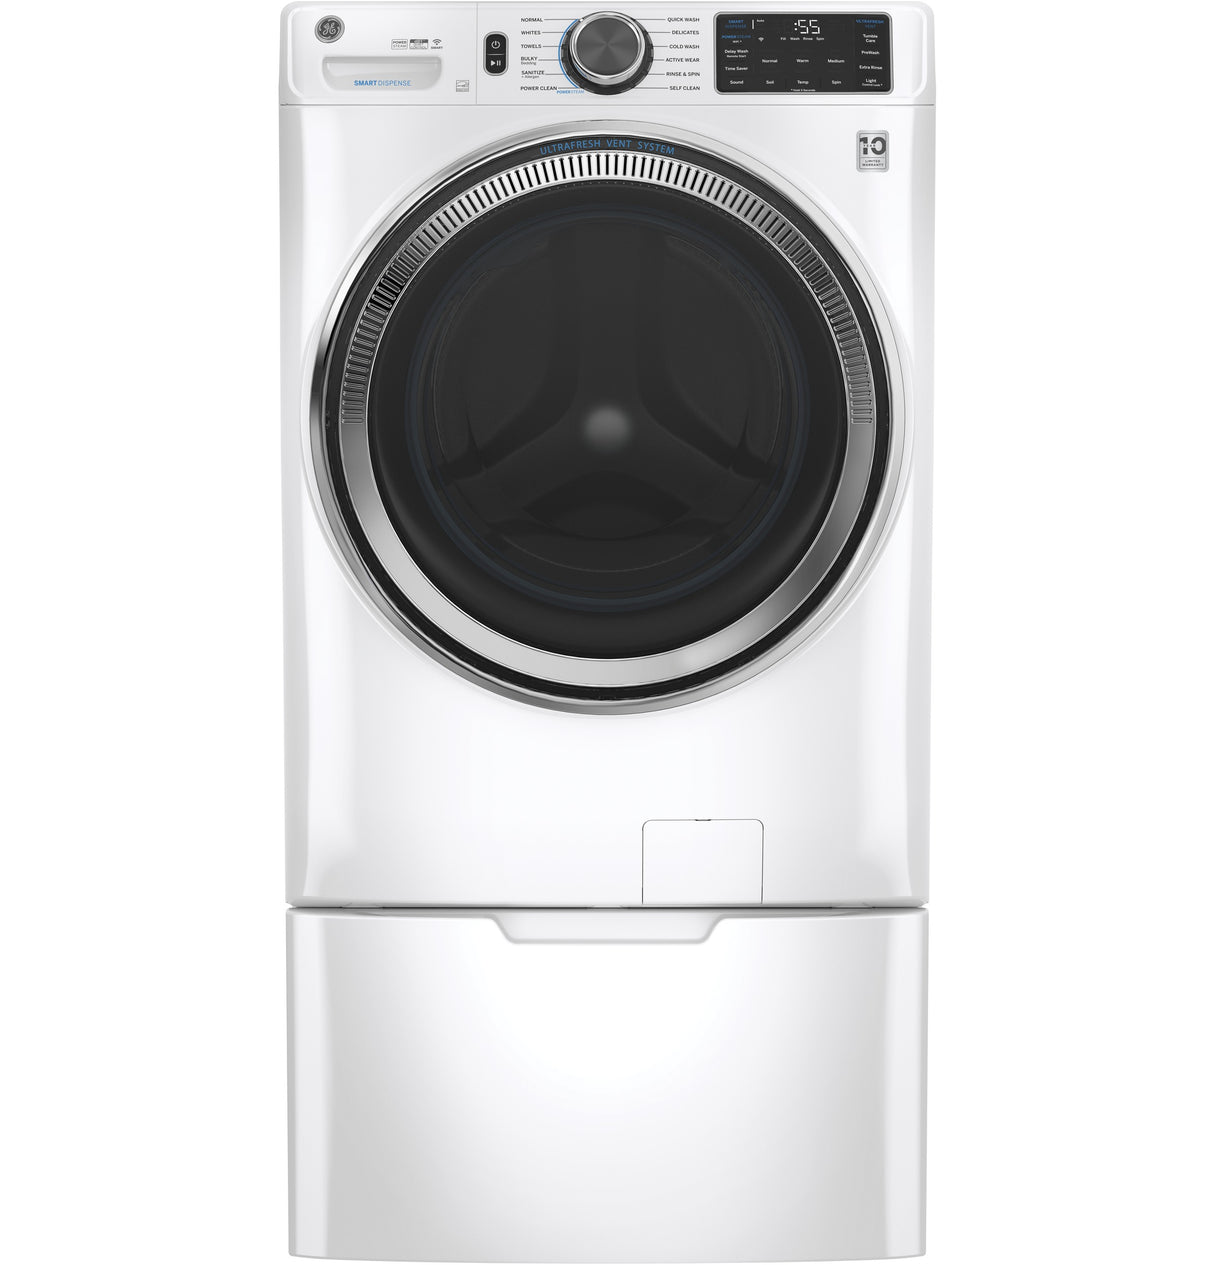 GE(R) ENERGY STAR(R) 4.8 cu. ft. Capacity Smart Front Load Steam Washer with SmartDispense(TM) UltraFresh Vent System with OdorBlock(TM) and Sanitize + Allergen - (GFW650SSNWW)